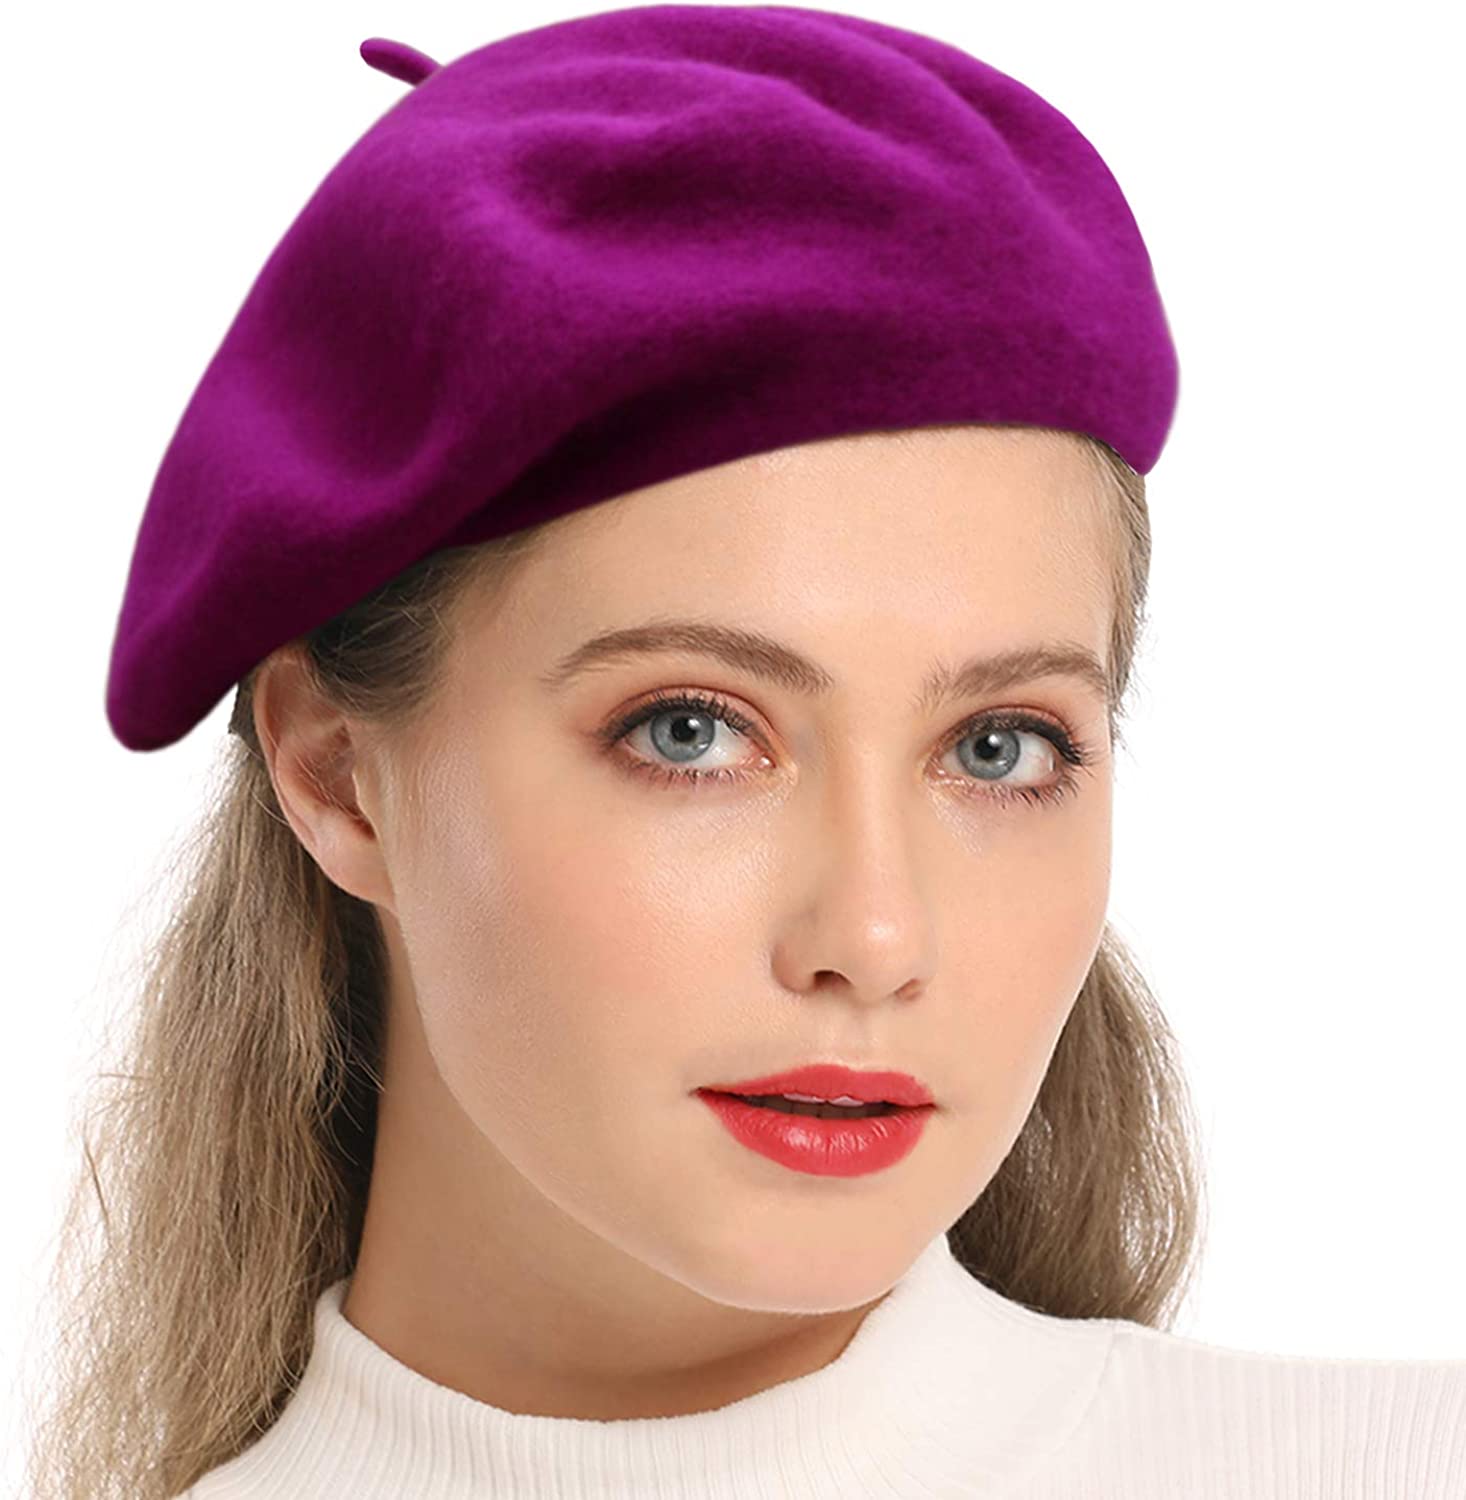 Beret Vintage Classic Wool Beret French Artist Solid Color Wool Hat Fashion Warm Caps for Women Pink 1 Pcs